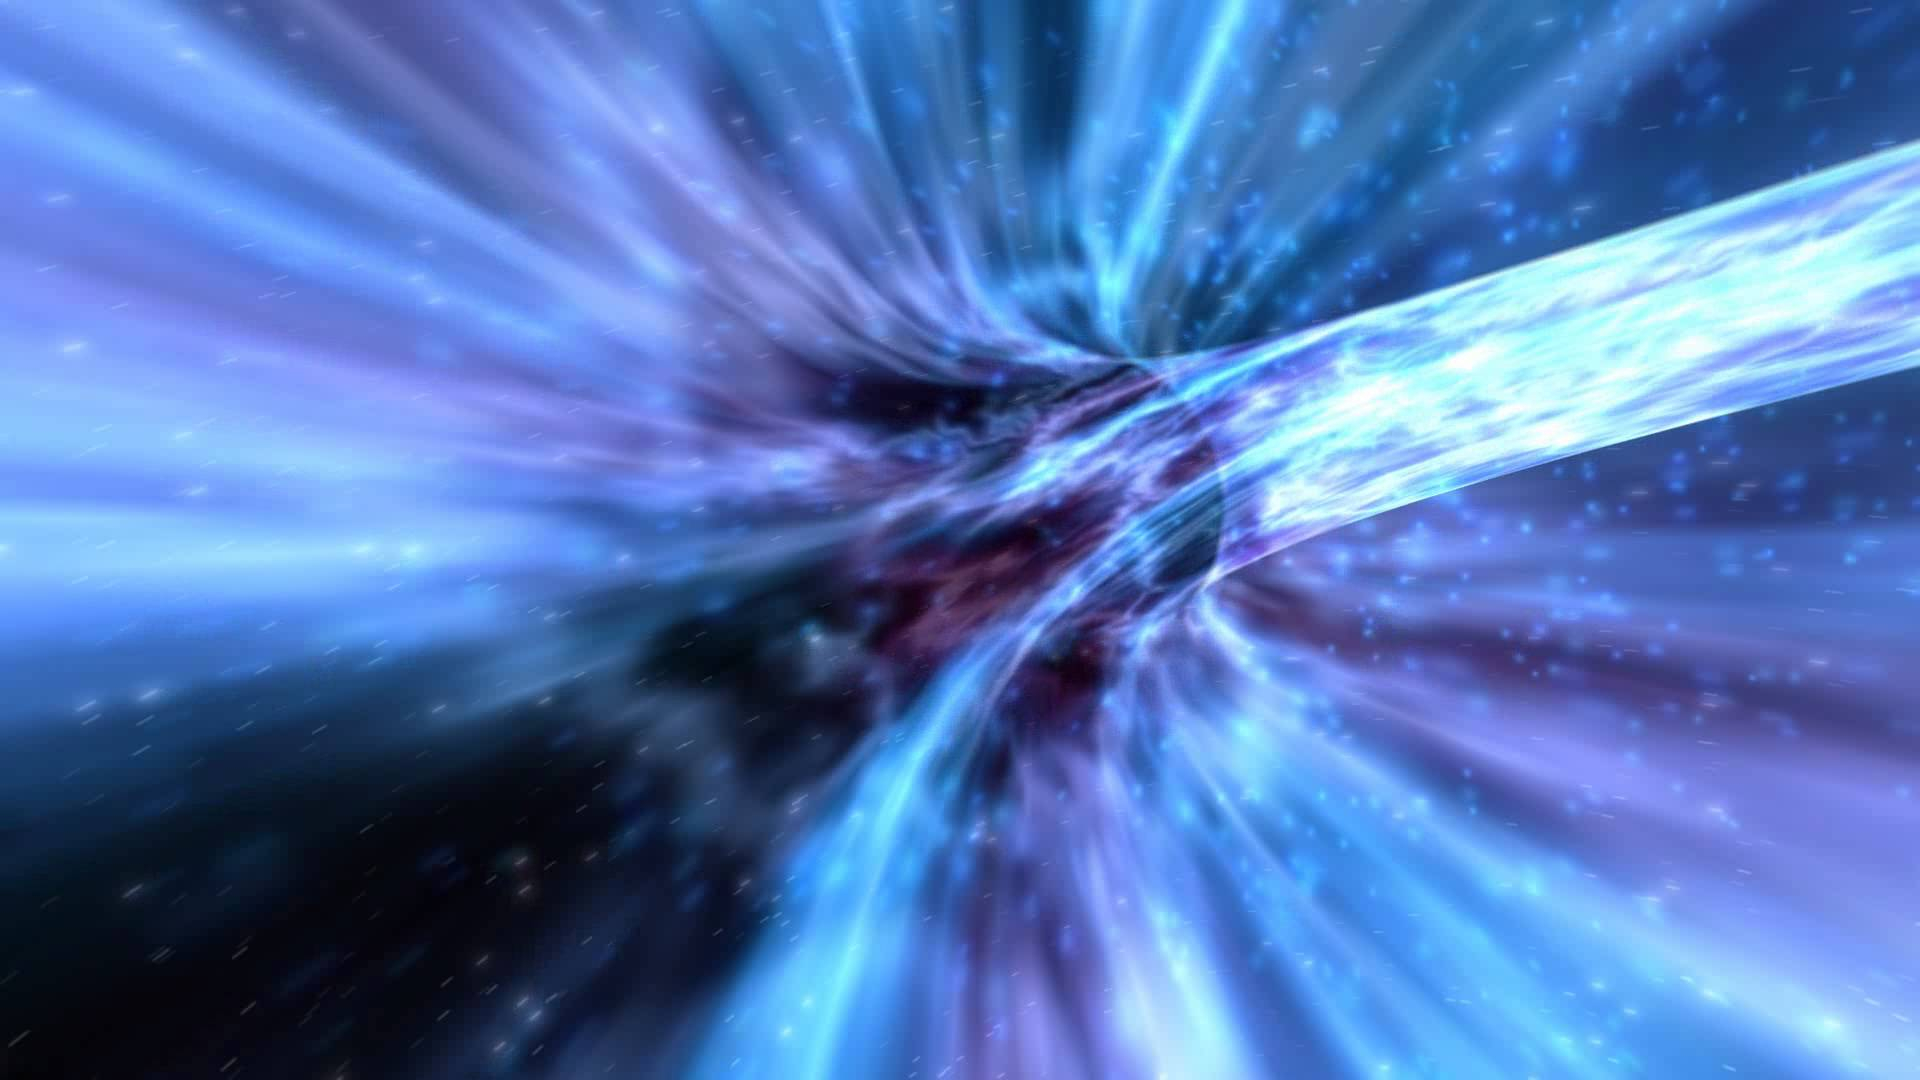 1920x1080 Free download Space Wormhole 3D Screensaver Live Wallpaper [] for your Desktop, Mobile \u0026 Tablet | Explore 48+ Interstellar Wormhole Wallpaper | Interstellar Wormhole Wallpaper, Wormhole Wallpaper, Interstellar Wallpapers